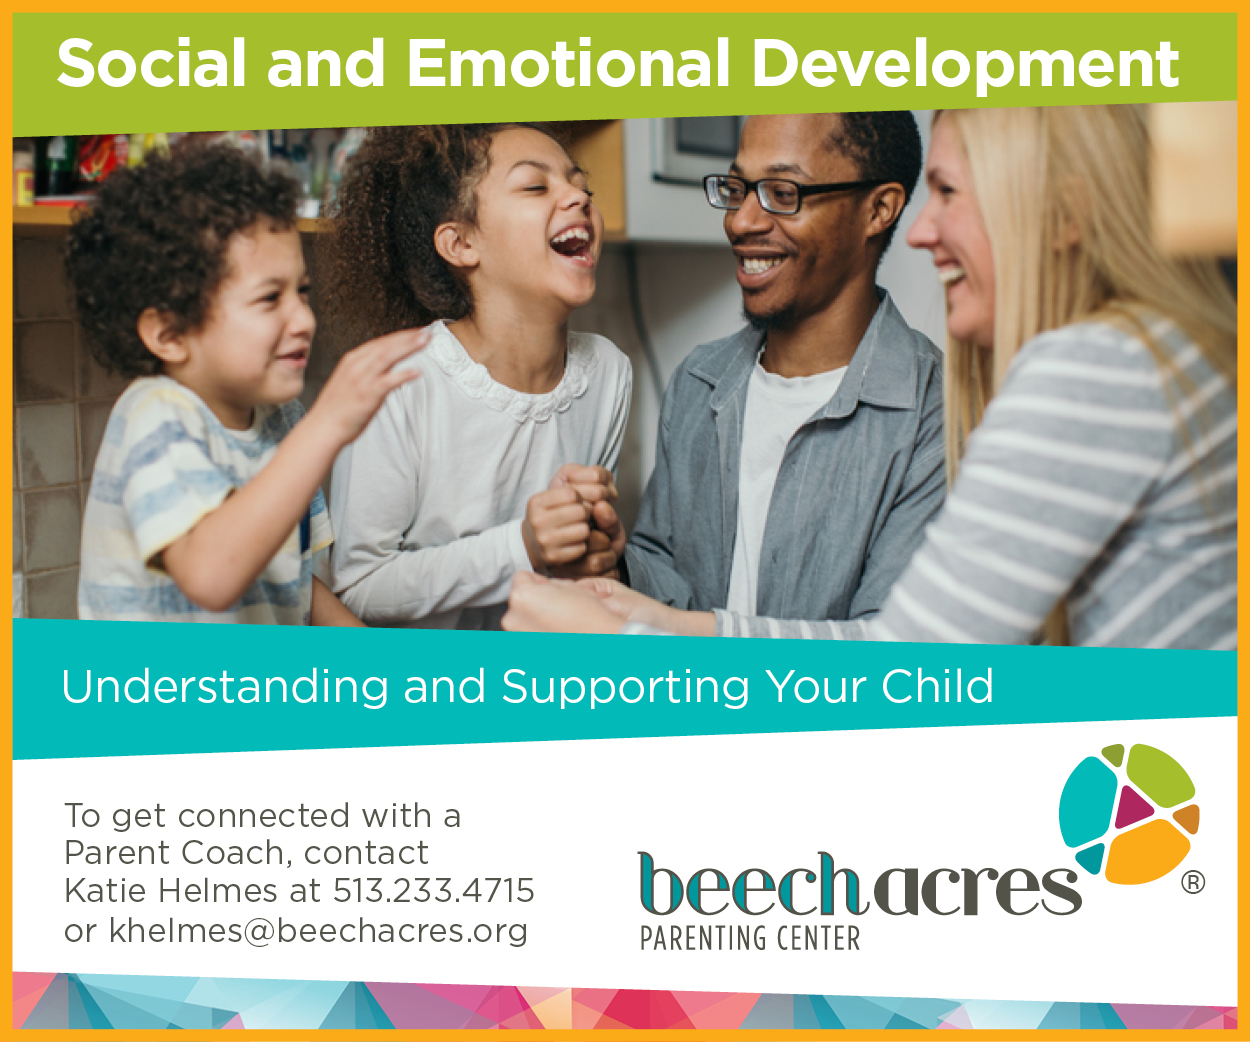 Understanding and Supporting Your Child’s Social and Emotional Development